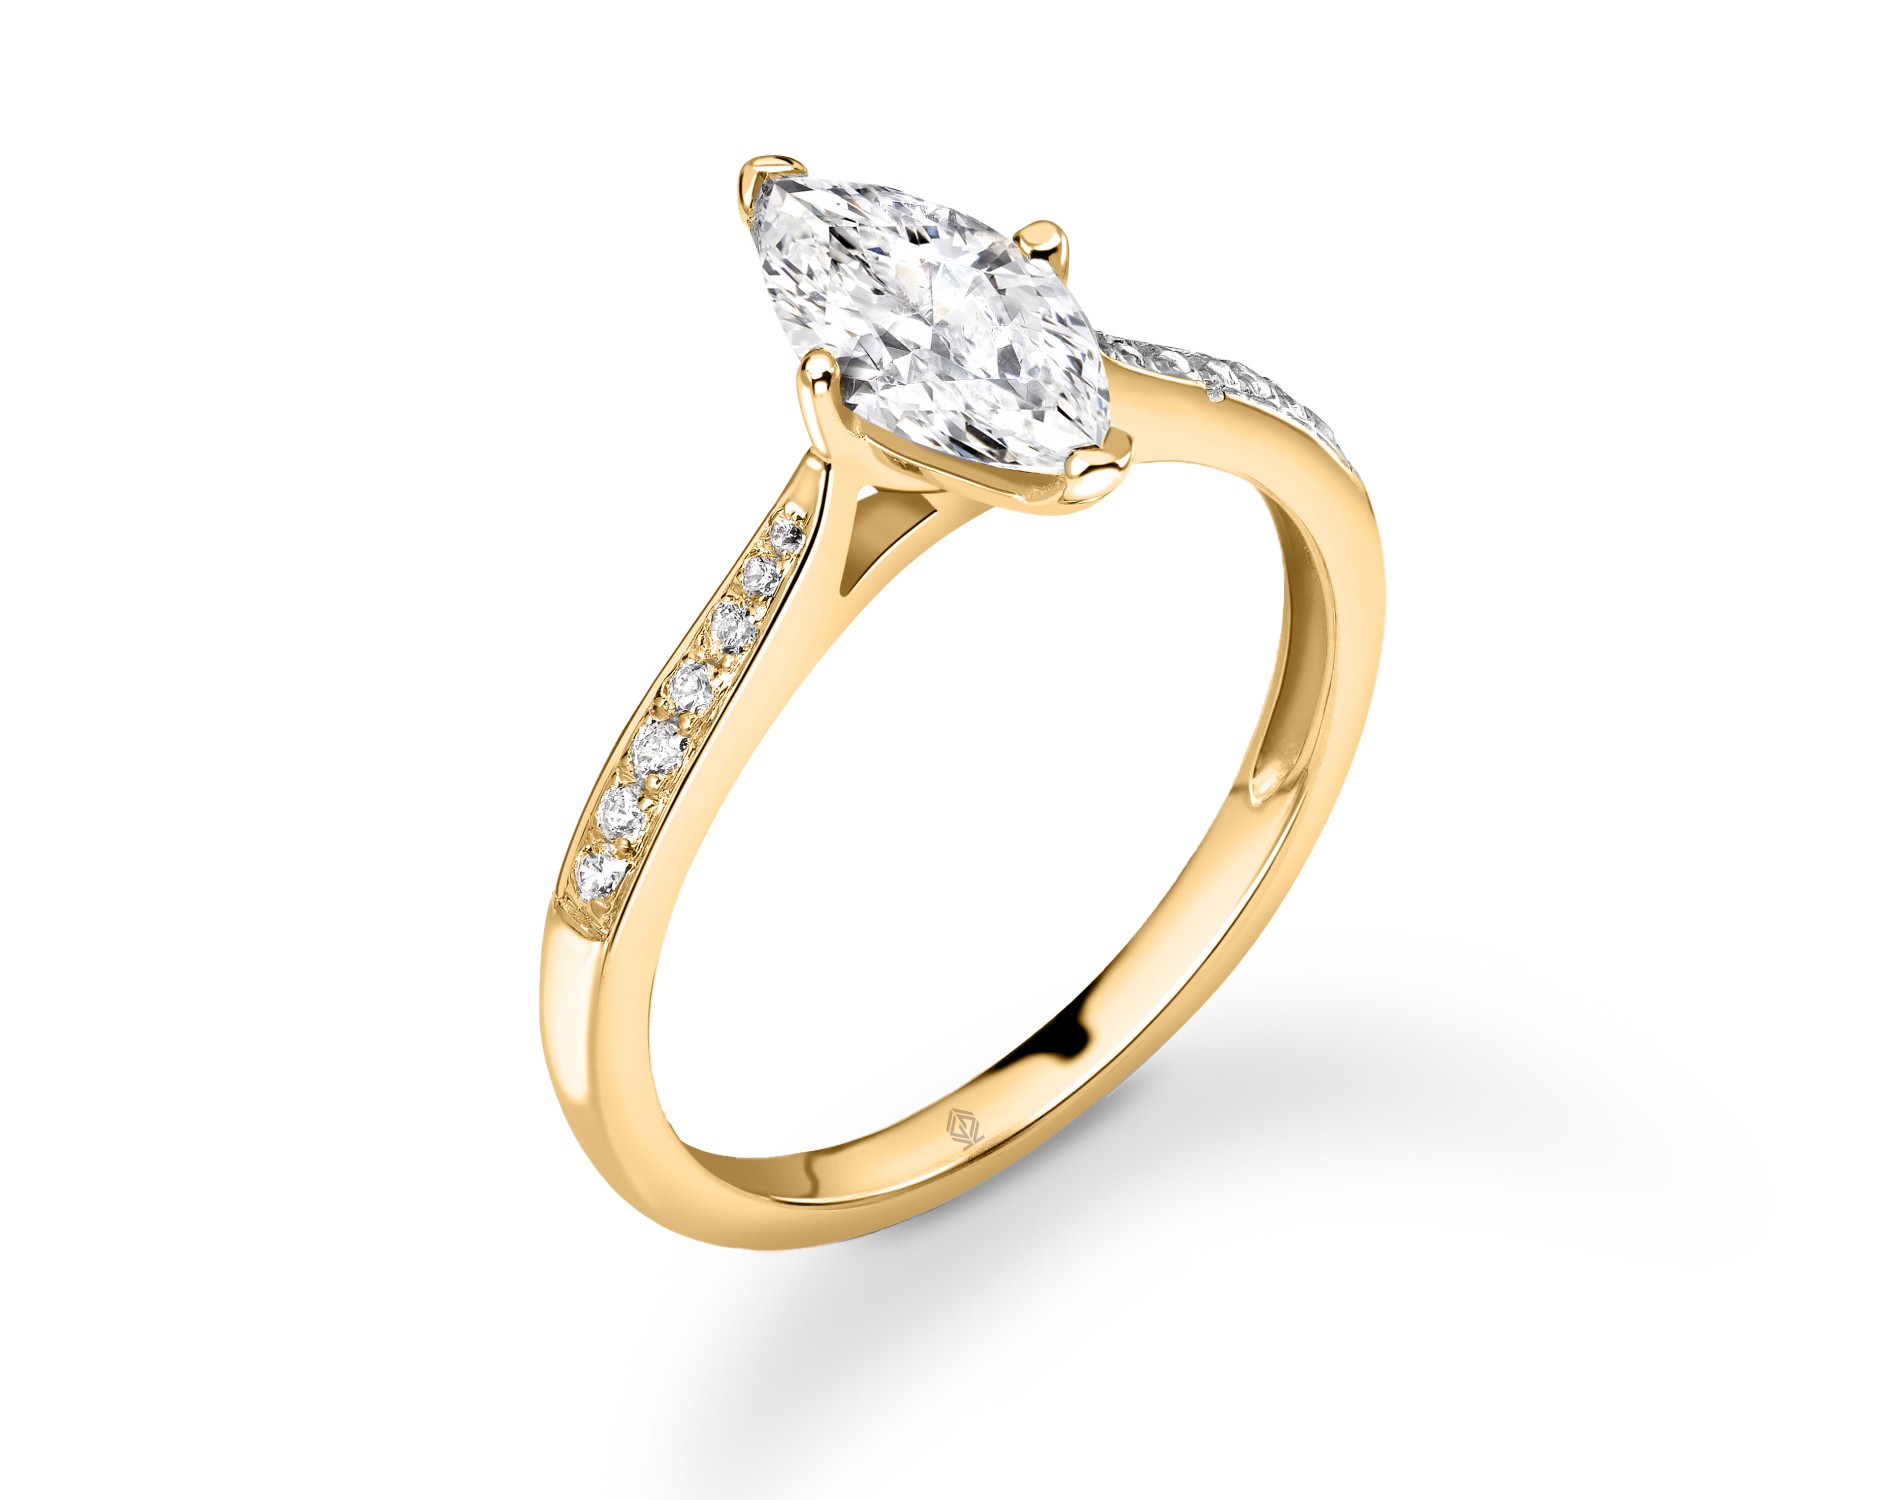 18K YELLOW GOLD MARQUISE CUT DIAMOND ENGAGEMENT RING WITH SIDE STONES CHANNEL SET